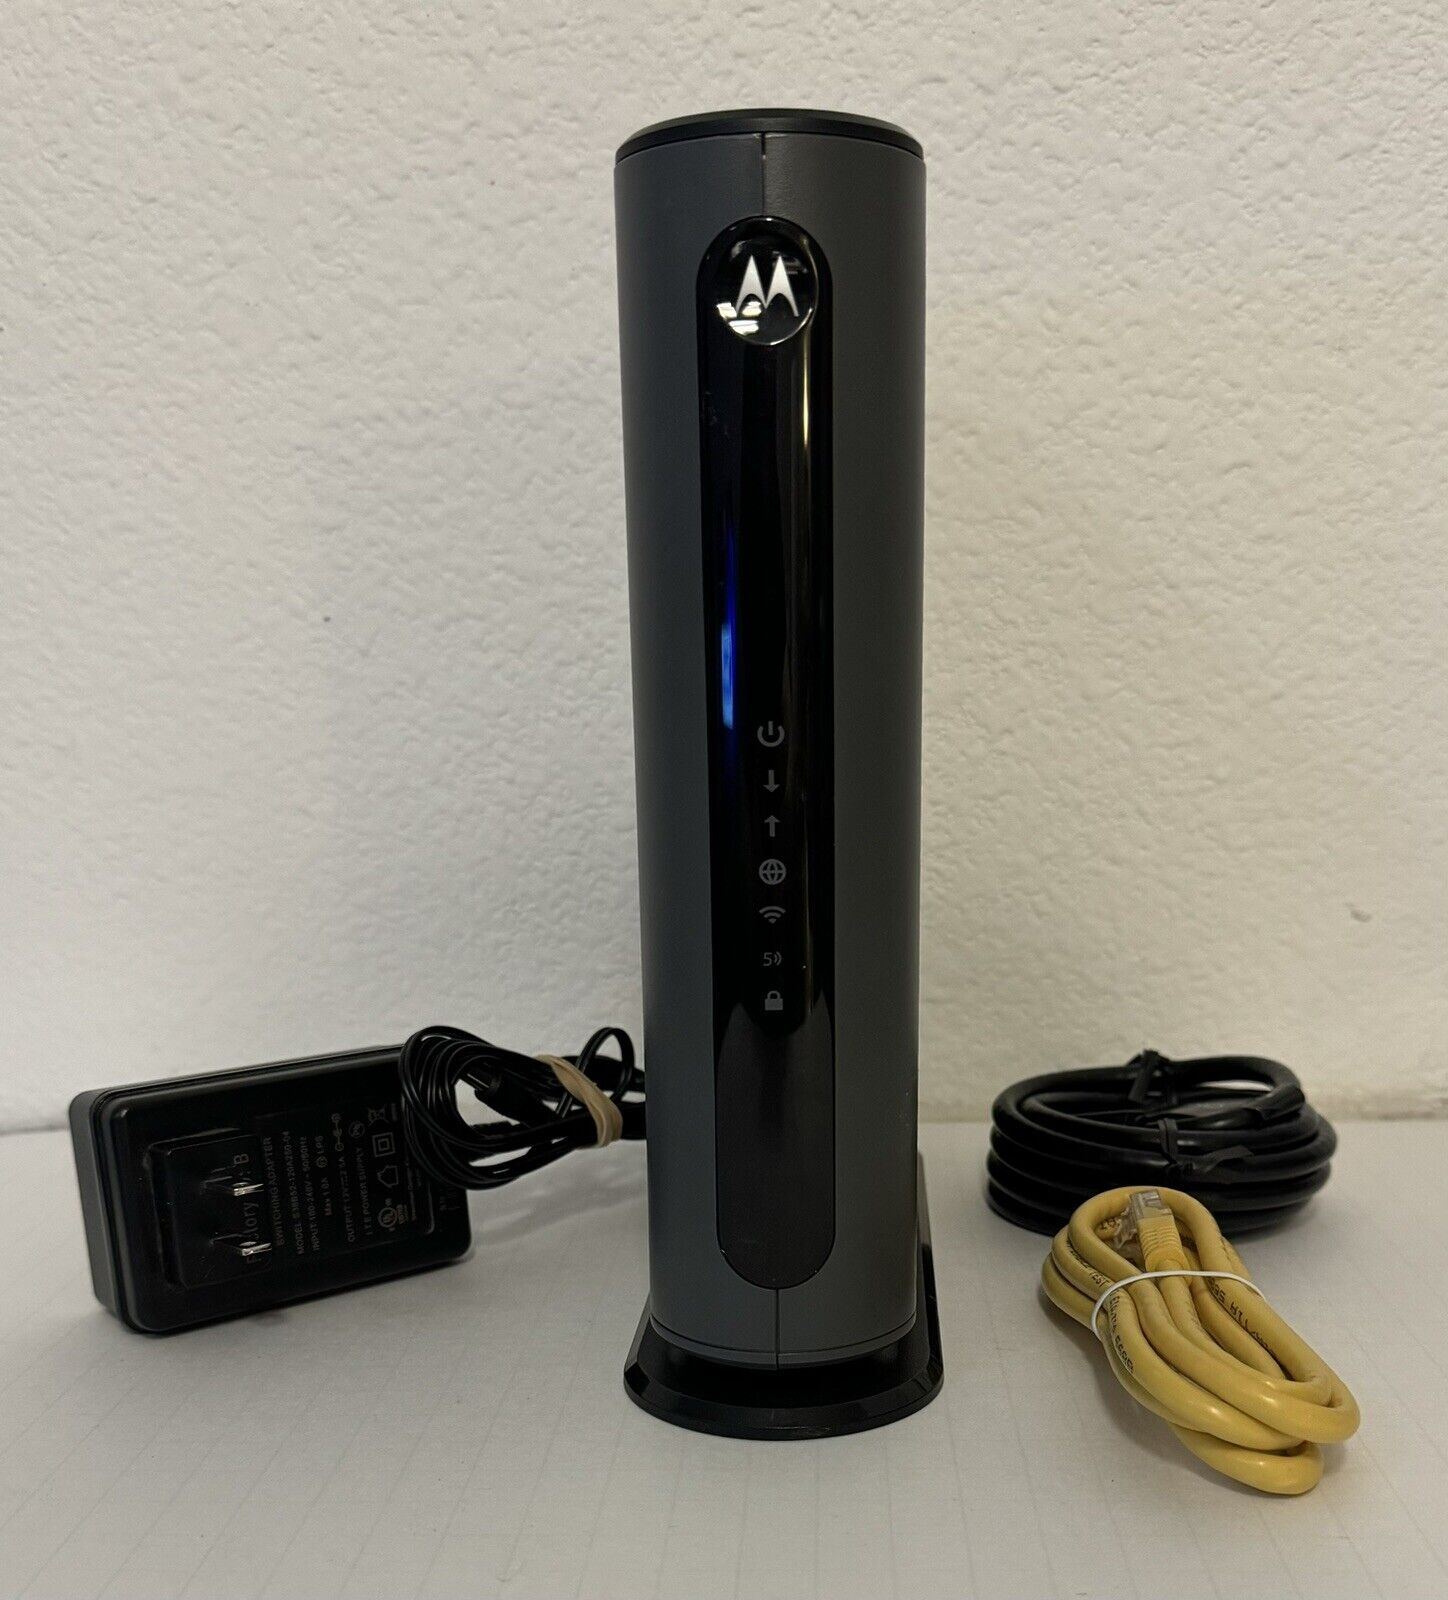 Motorola MG7550 Dual Band AC1900 Cable Modem and Wi-Fi Gigabit Router